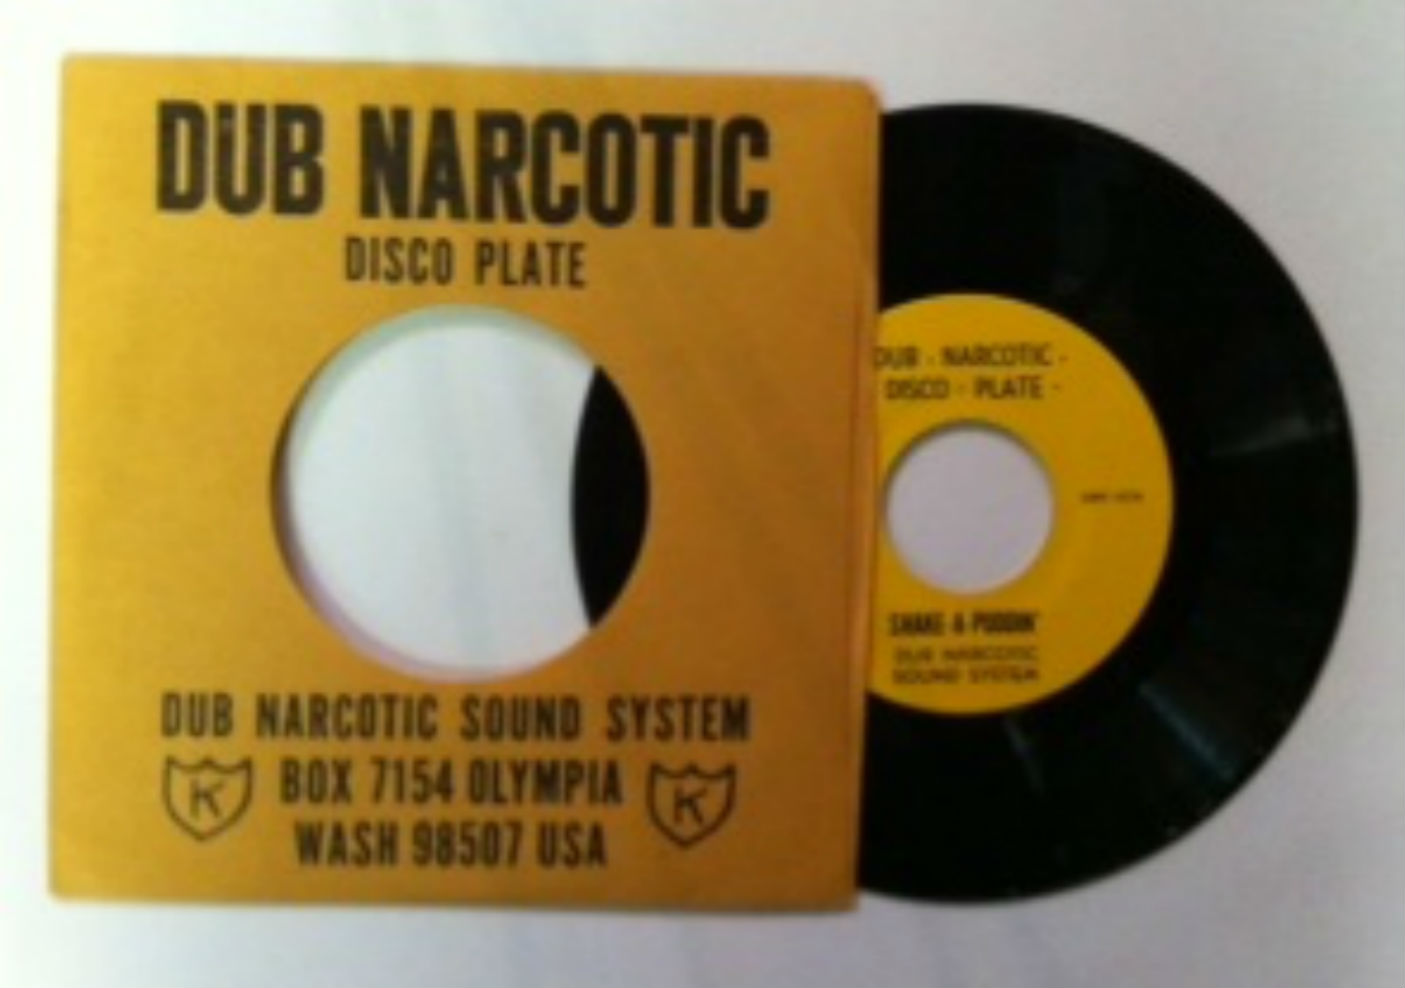 Dub Narcotic Sound System / Disco Plate